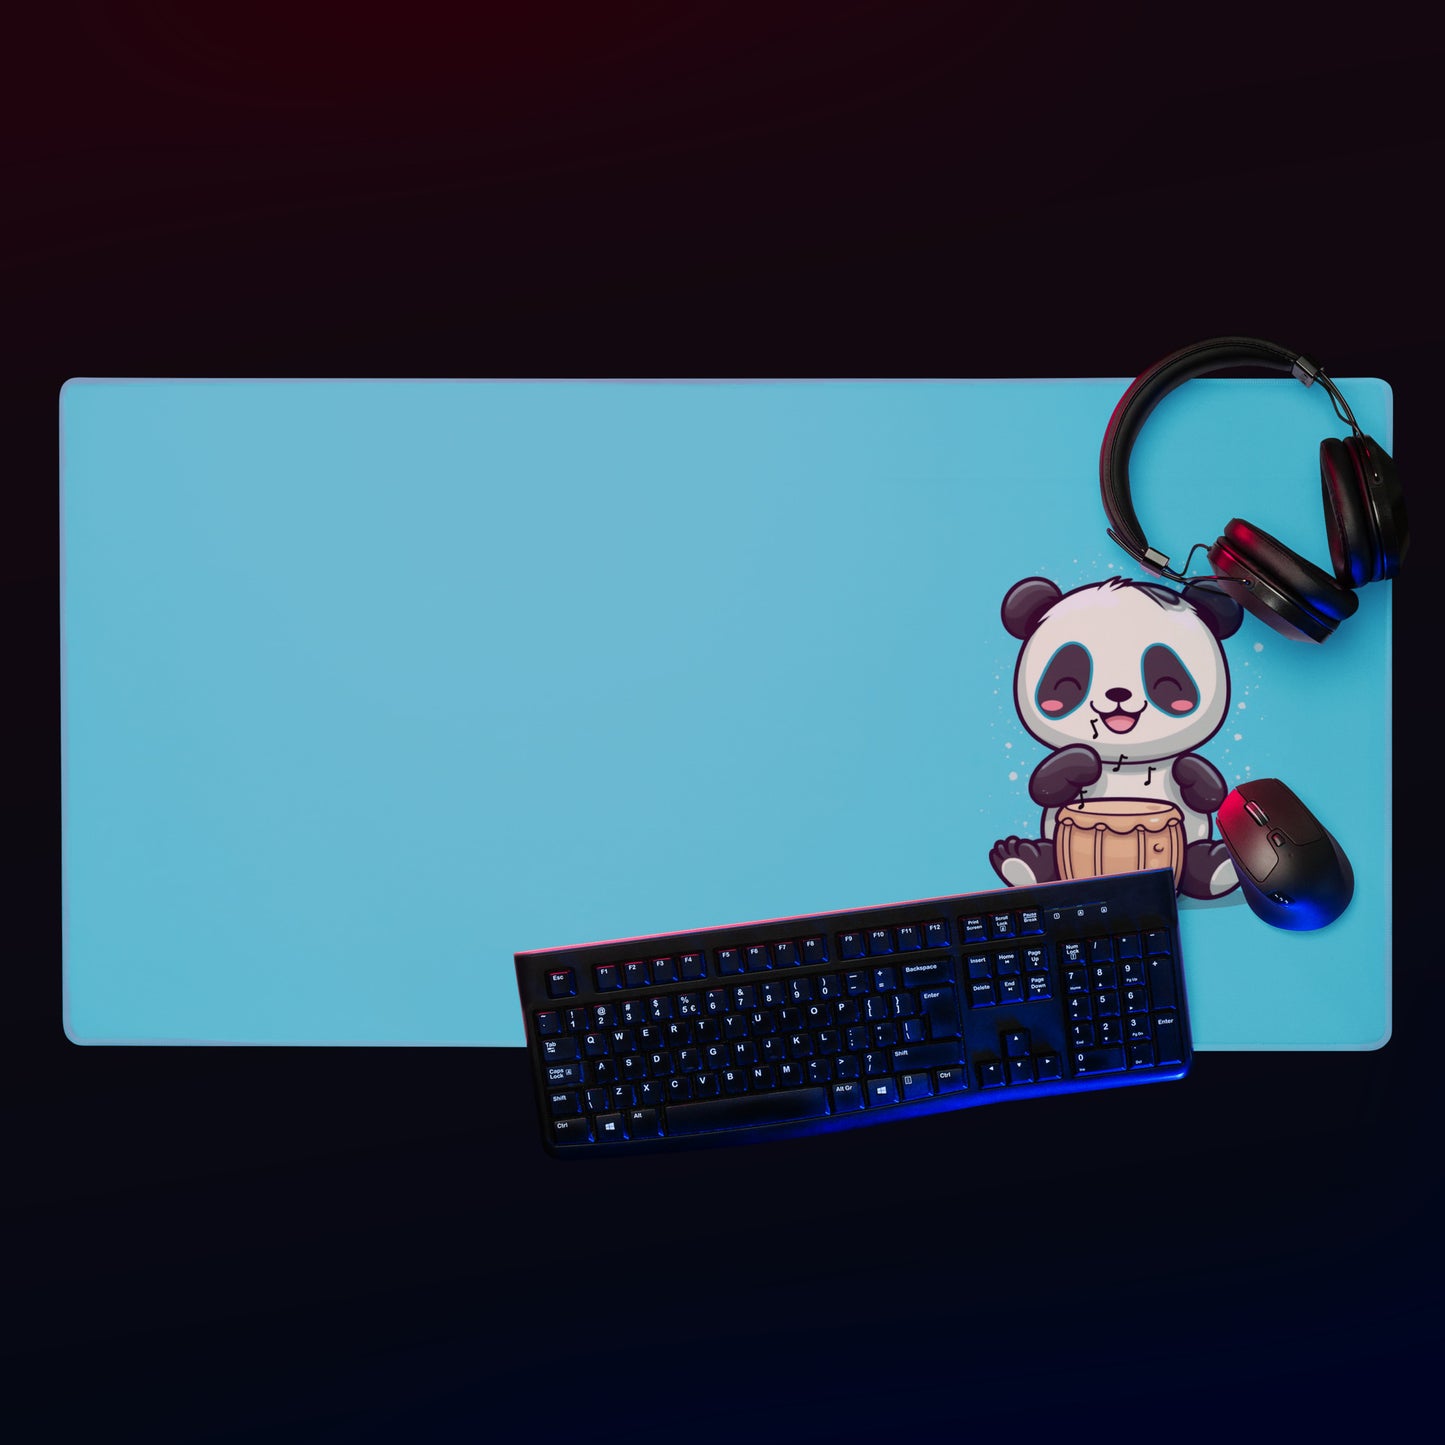 A 36" x 18" desk pad with a cute panda playing the bongos on the right displayed with  headphones, a keyboard and a mouse on it. Blue in color.